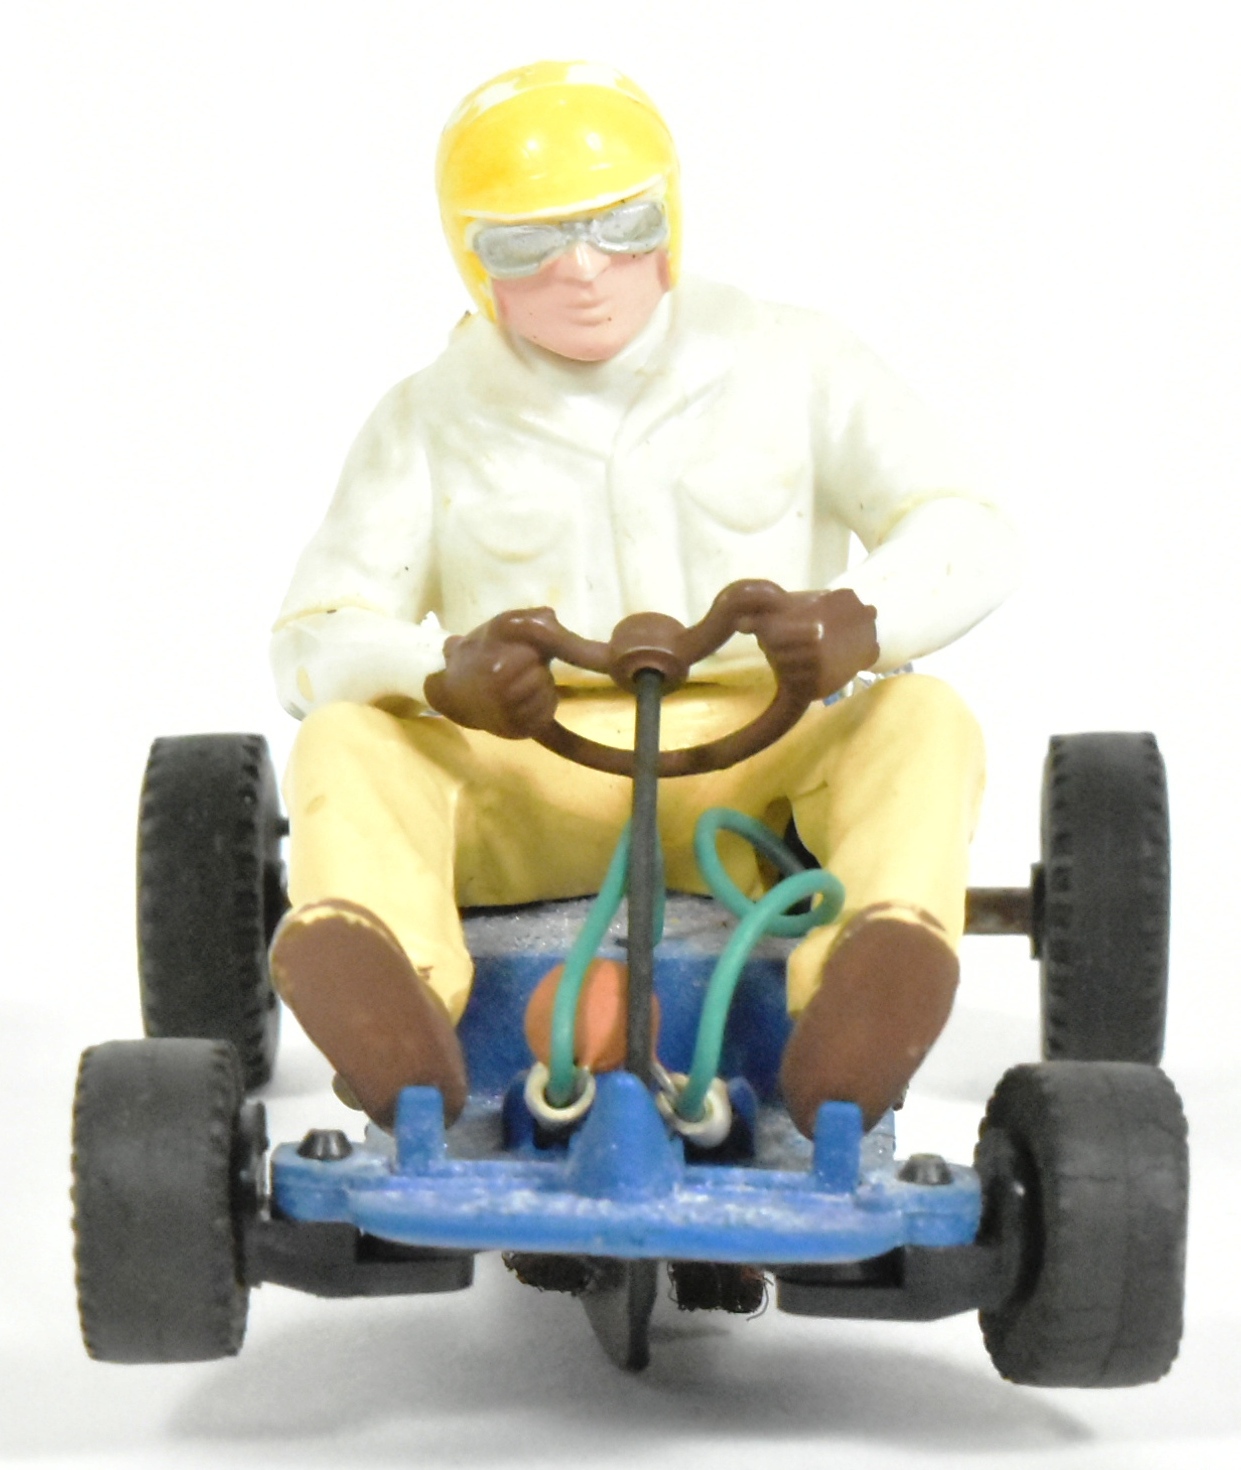 SCALEXTRIC - VINTAGE TRIANG SCALEXTRIC K1 GO KART - Image 2 of 5